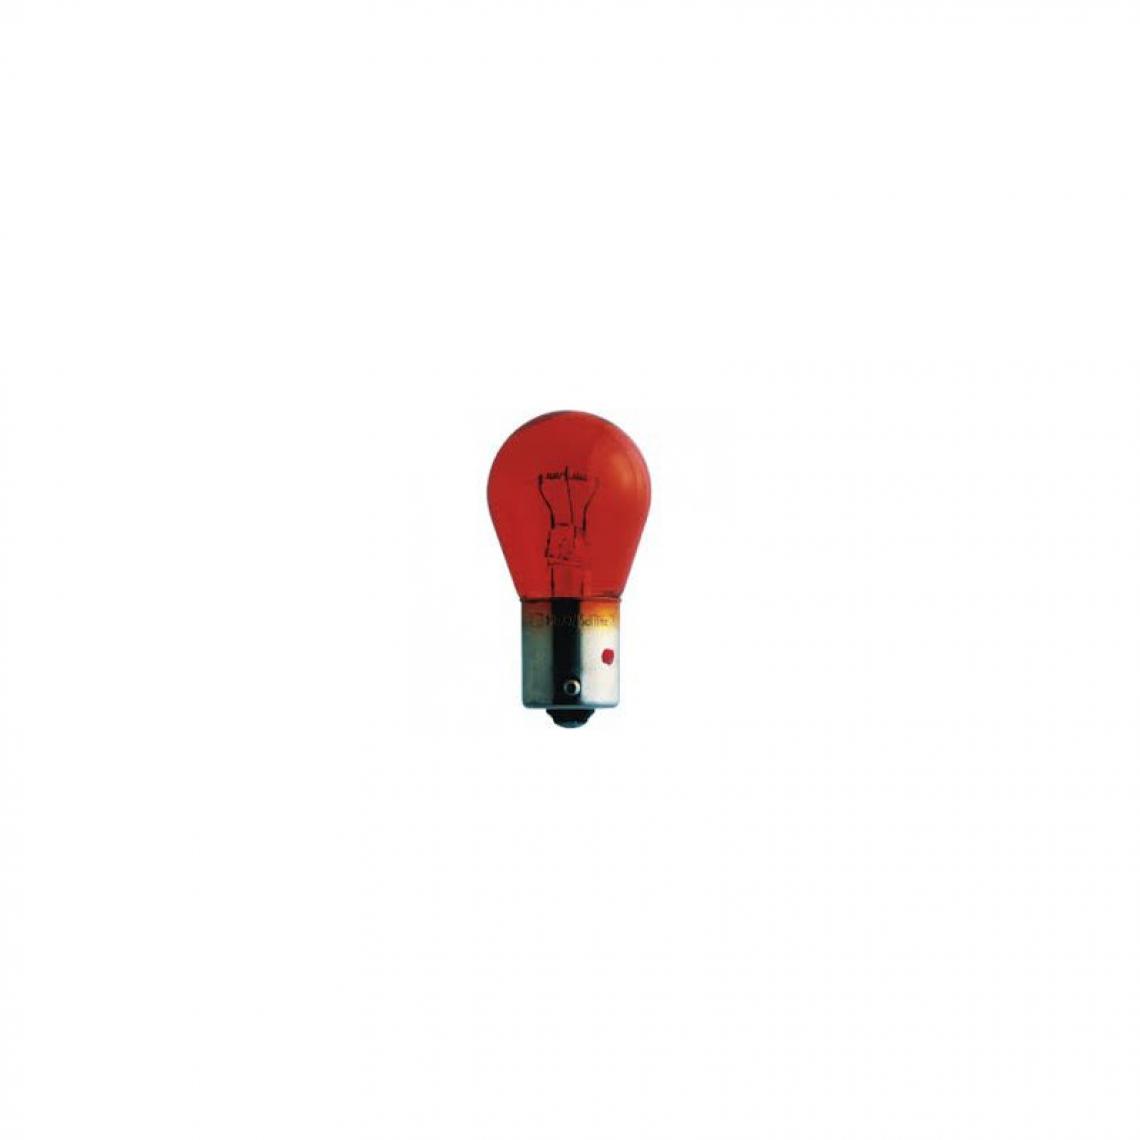 Philips - AMPOULE PHILIPS 13496MLCP PY21W 13496 ML 24V - Ampoules LED